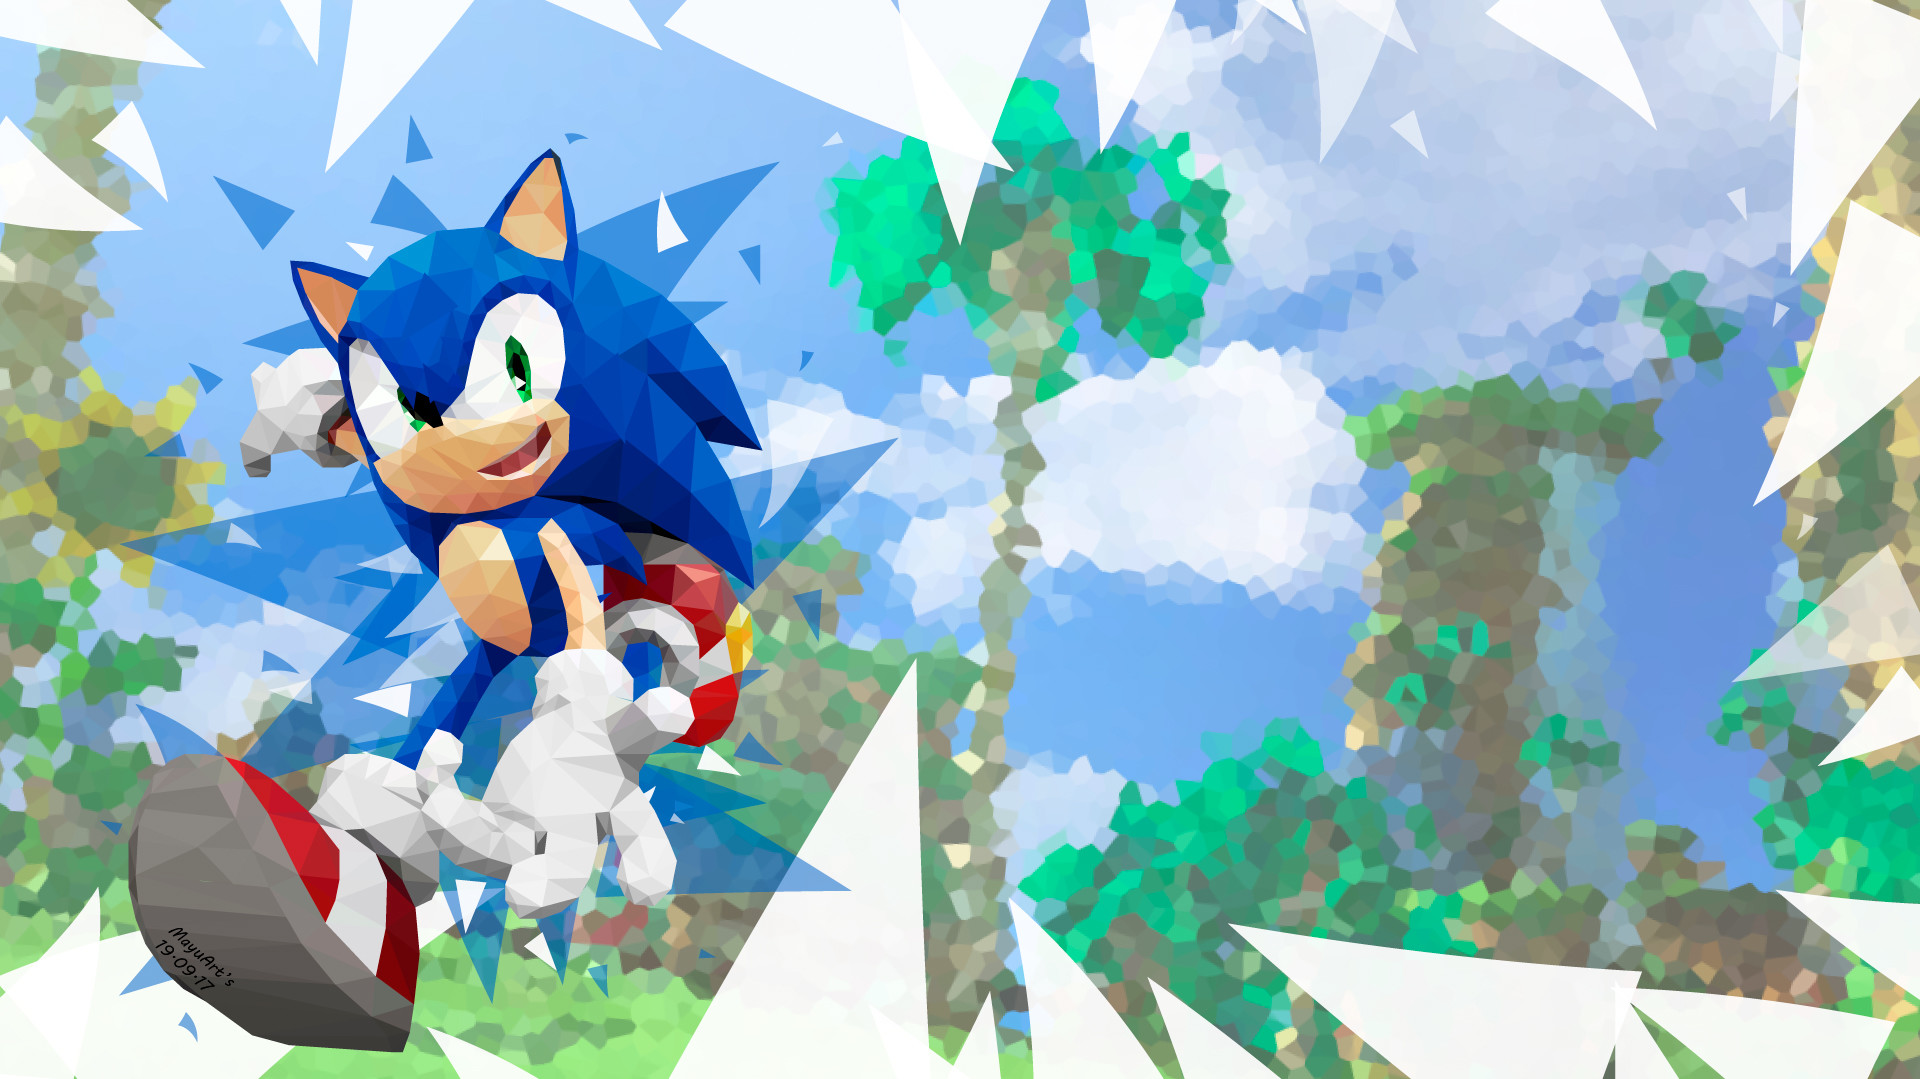 ArtStation - Sonic the Hedgehog 2 - Concept Green Hill Zone